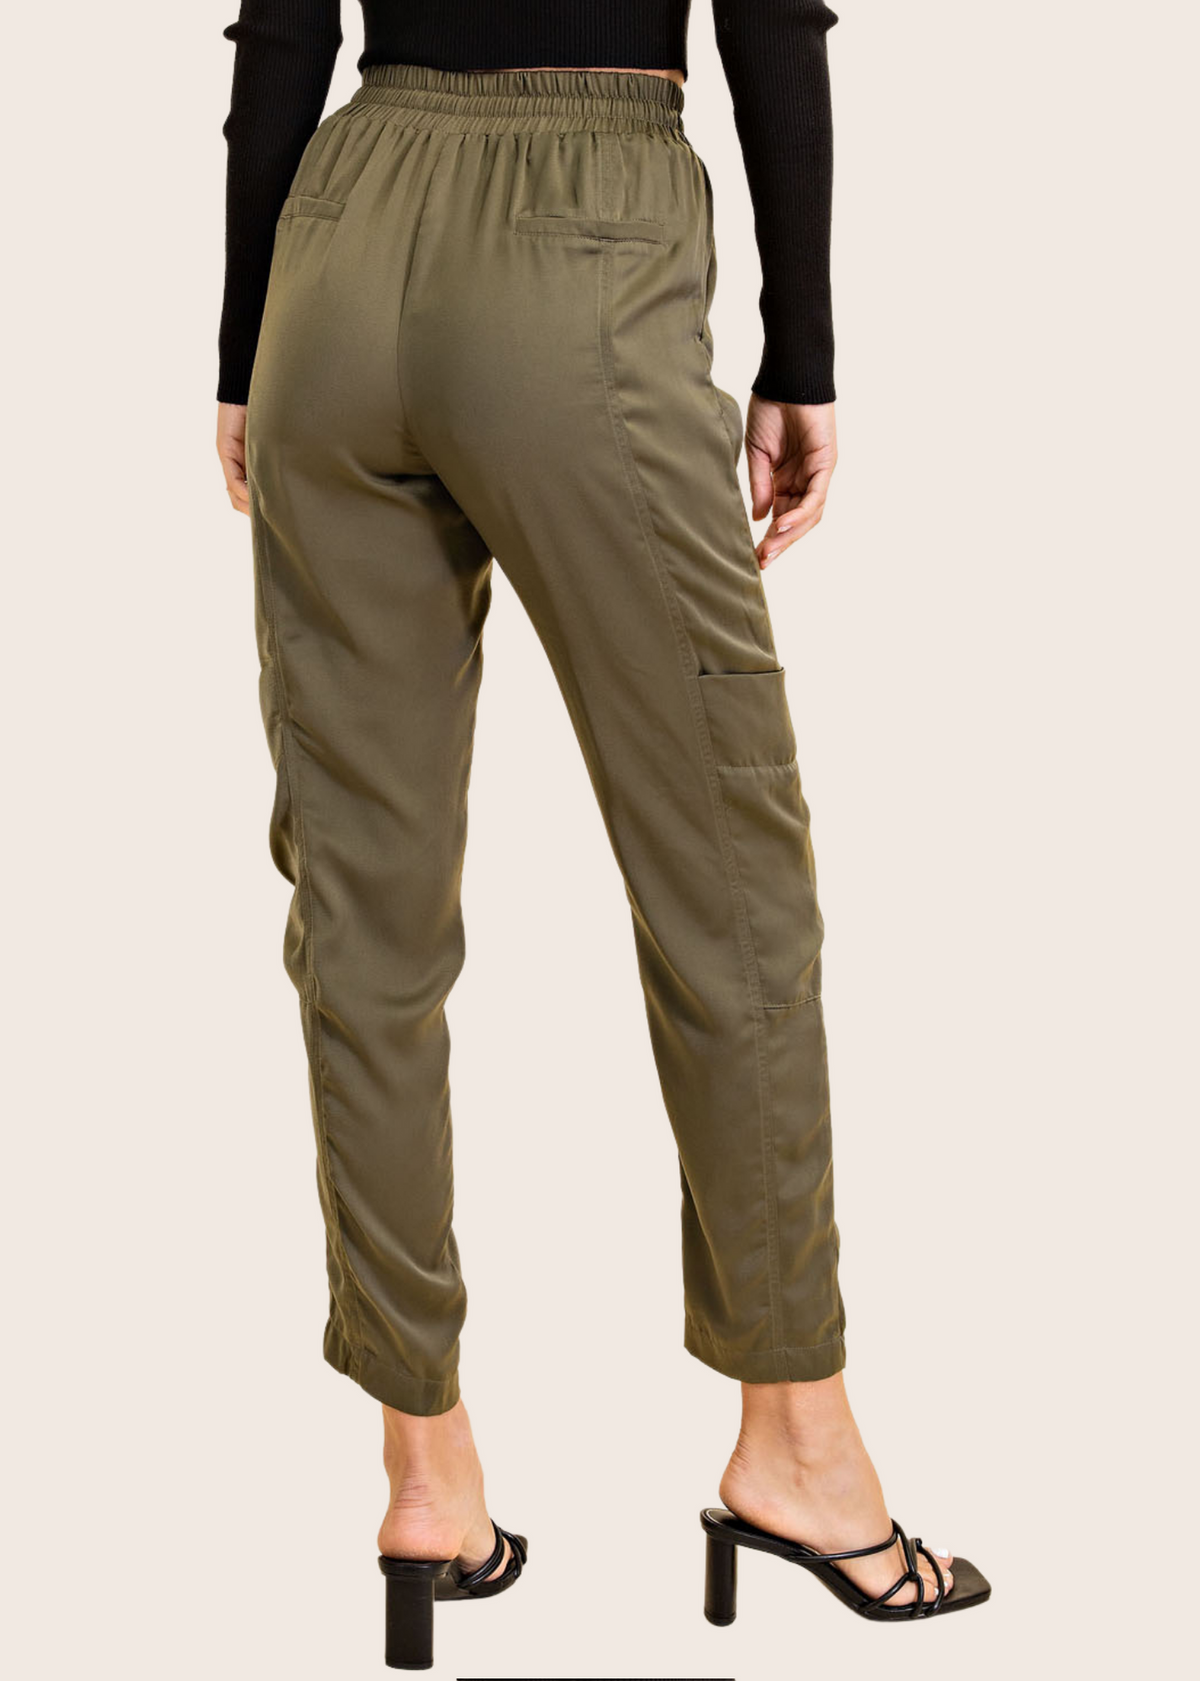 Olive Silky Cargo Pants/Trousers with Drawstring